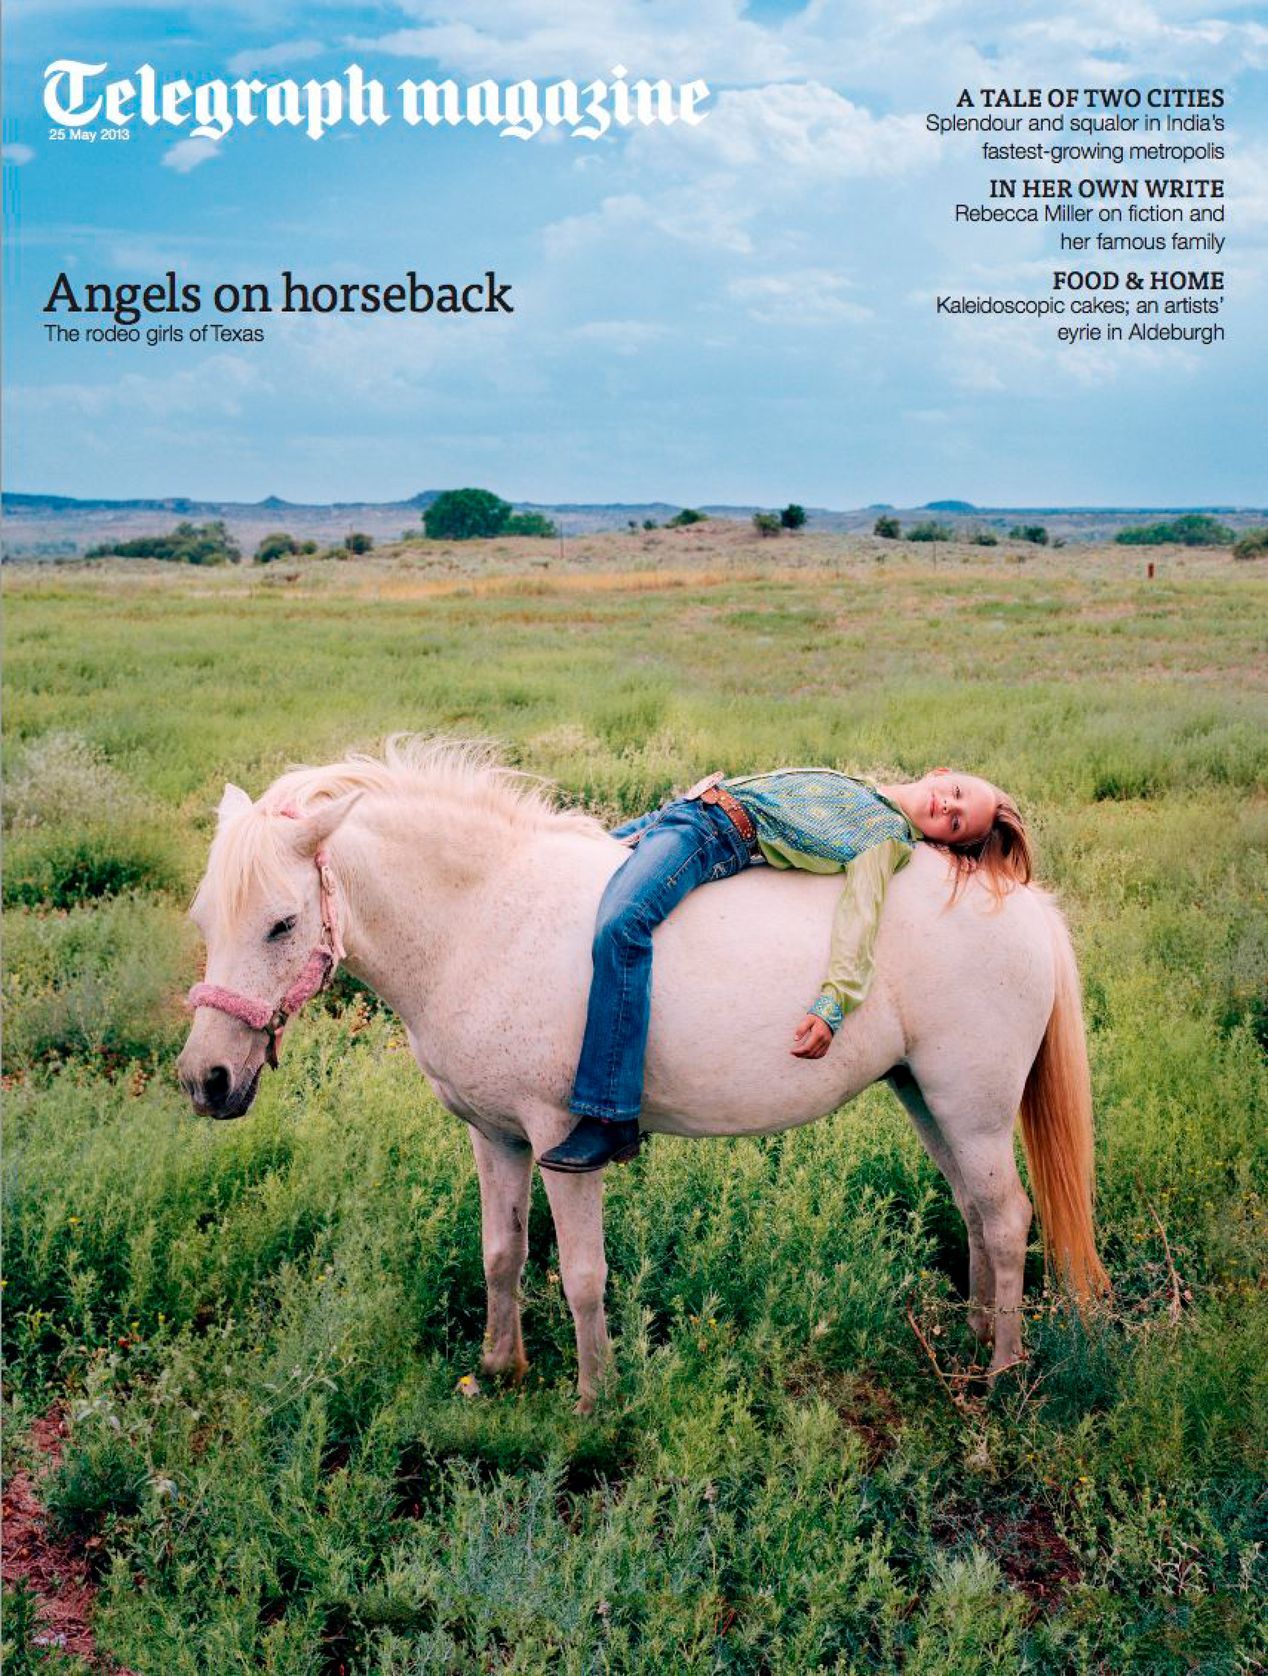 Cover of the Telegraph Magazine, editorial photography, Ilona Szwarc, Los Angeles.